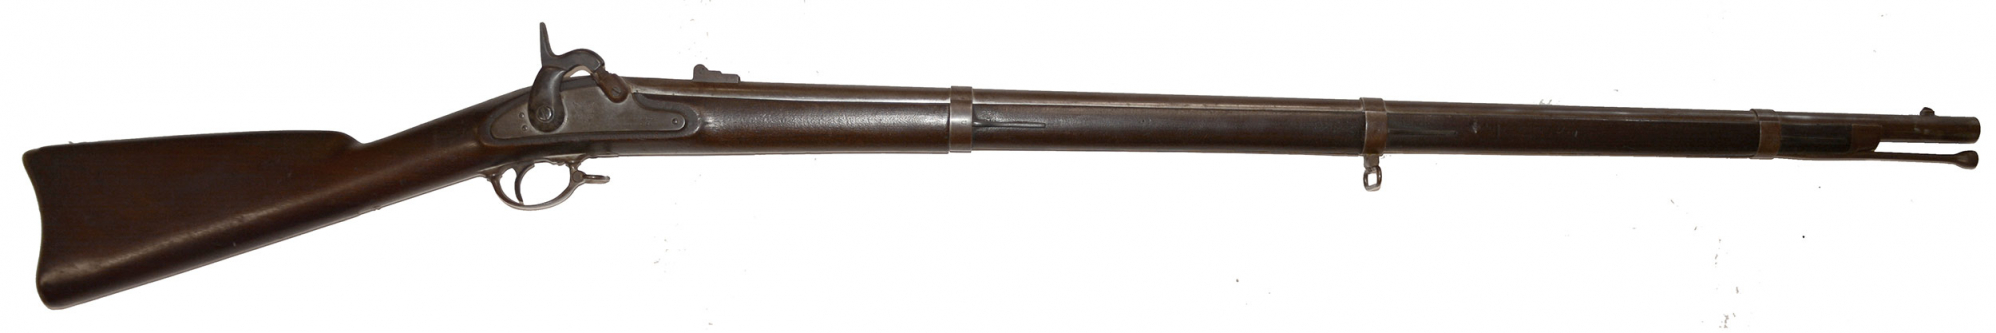 VERY NICE “SAVAGE” MODEL 1861 RIFLE MUSKET, DATED 1863, NEW JERSEY STAMPED